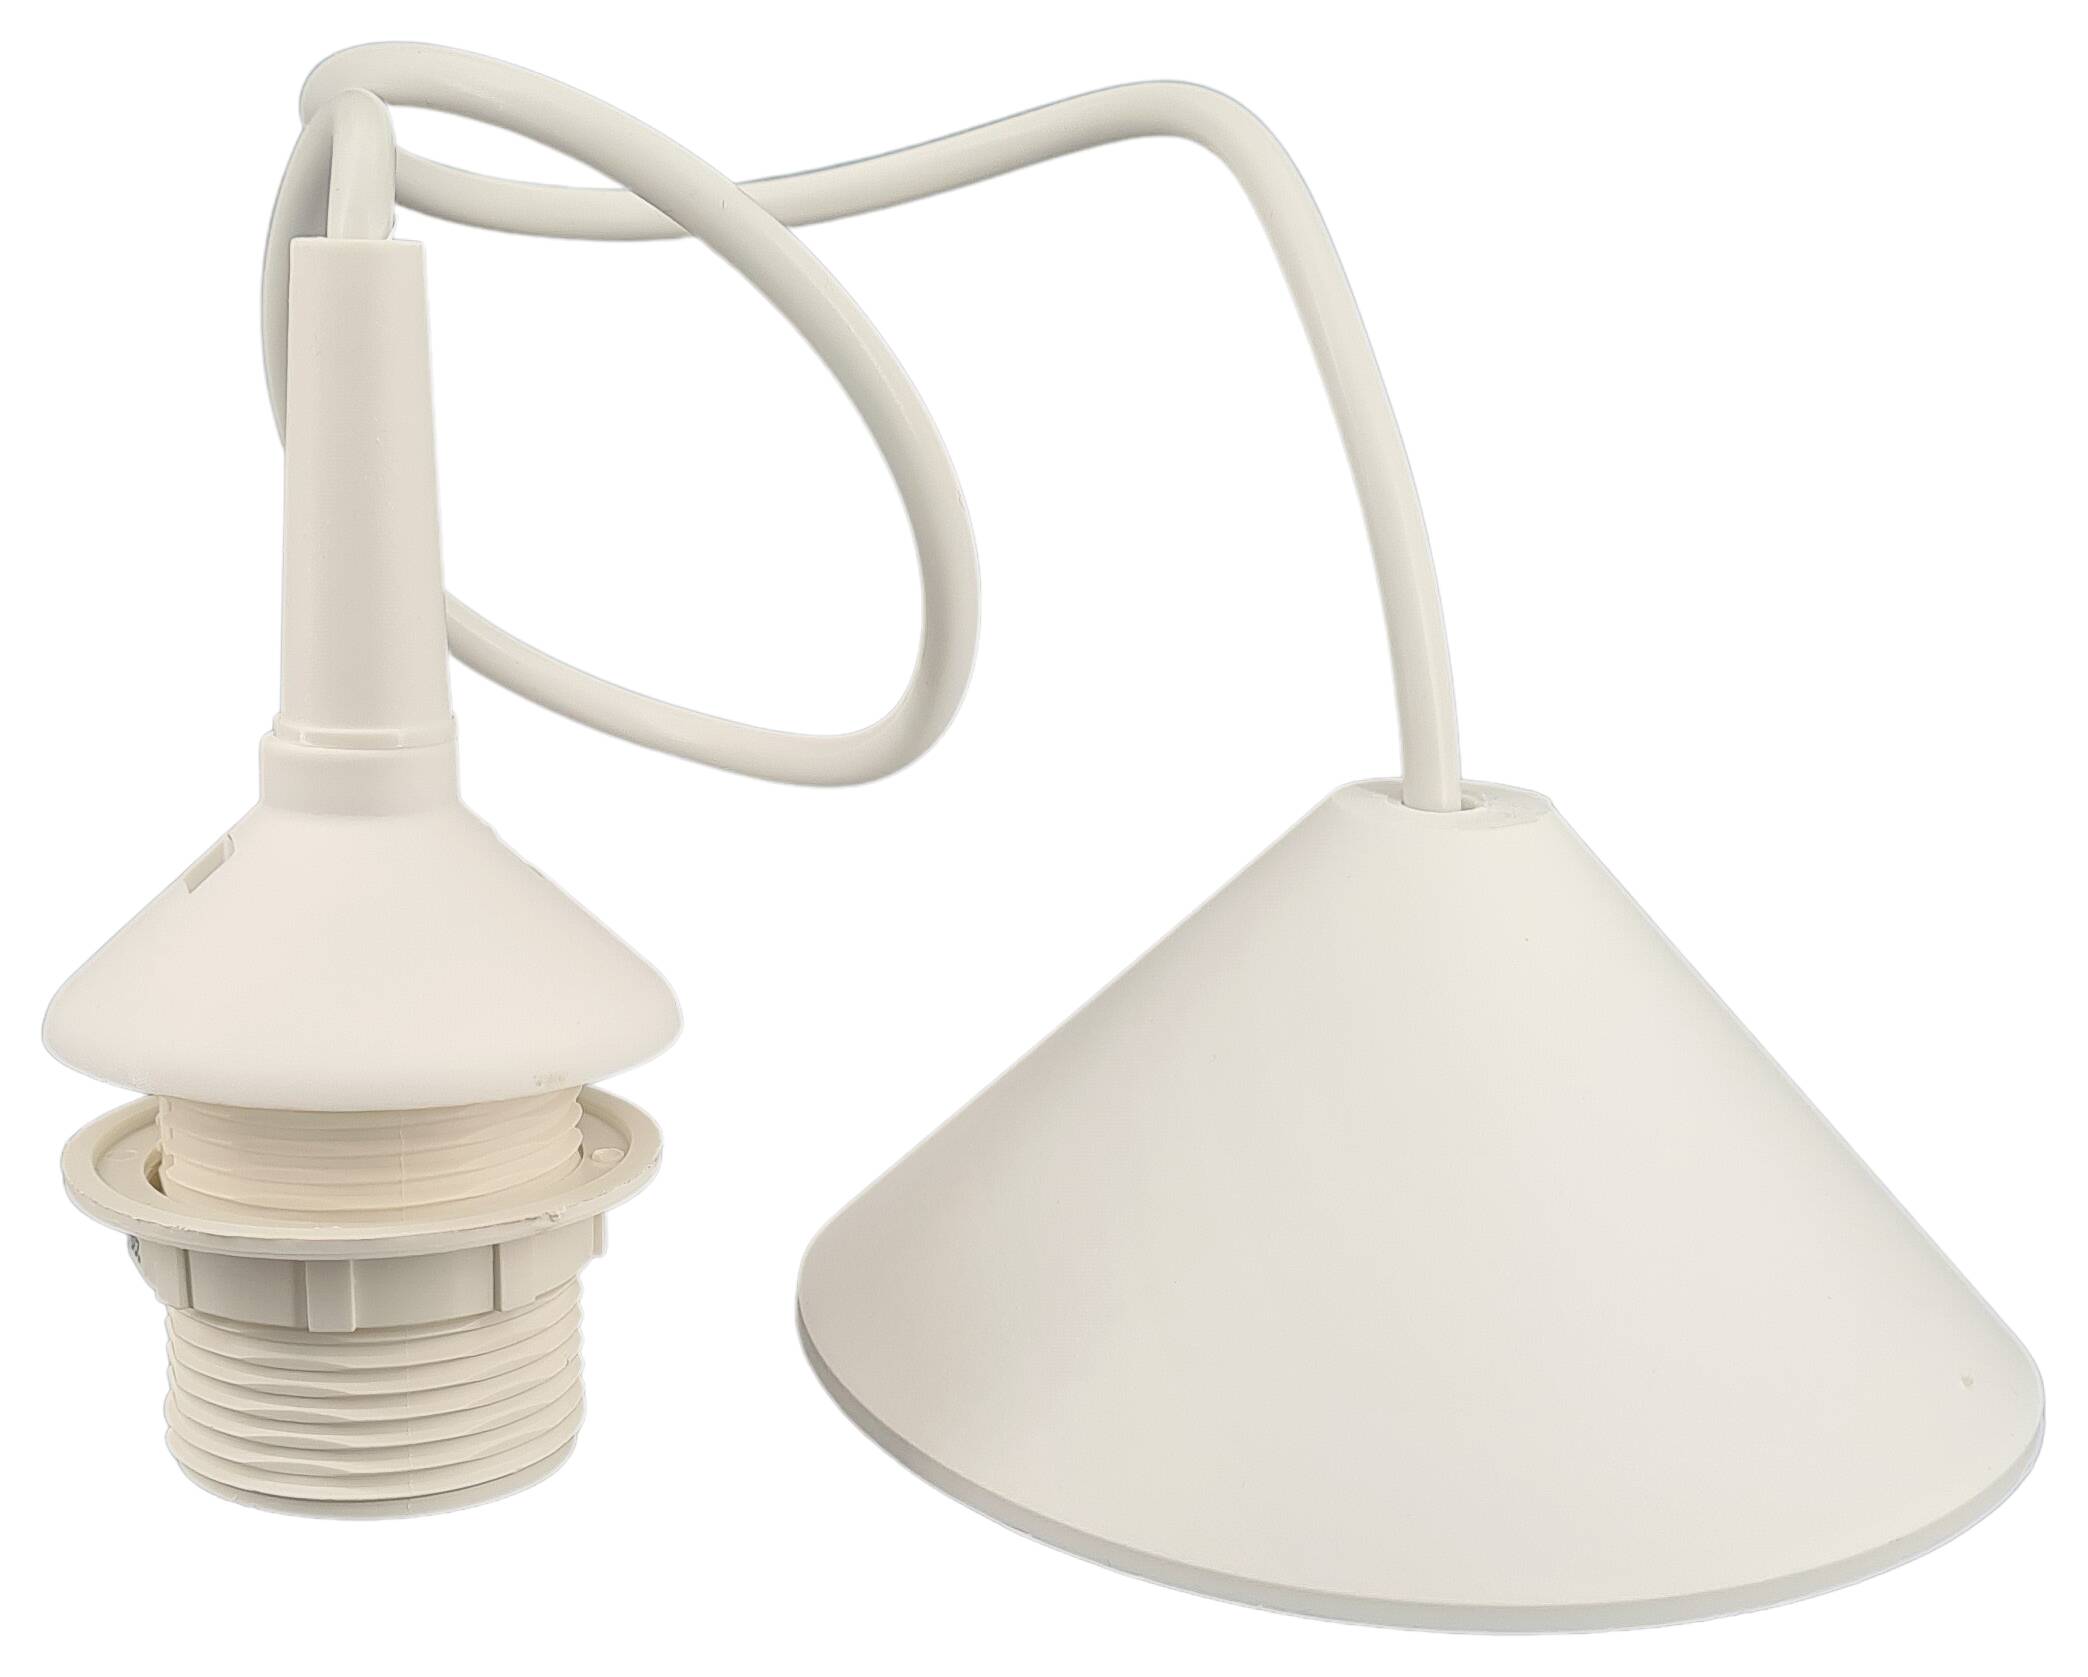 pendel 2x0,75 with conical ceiling cap mounted socket E27 120 cm long white